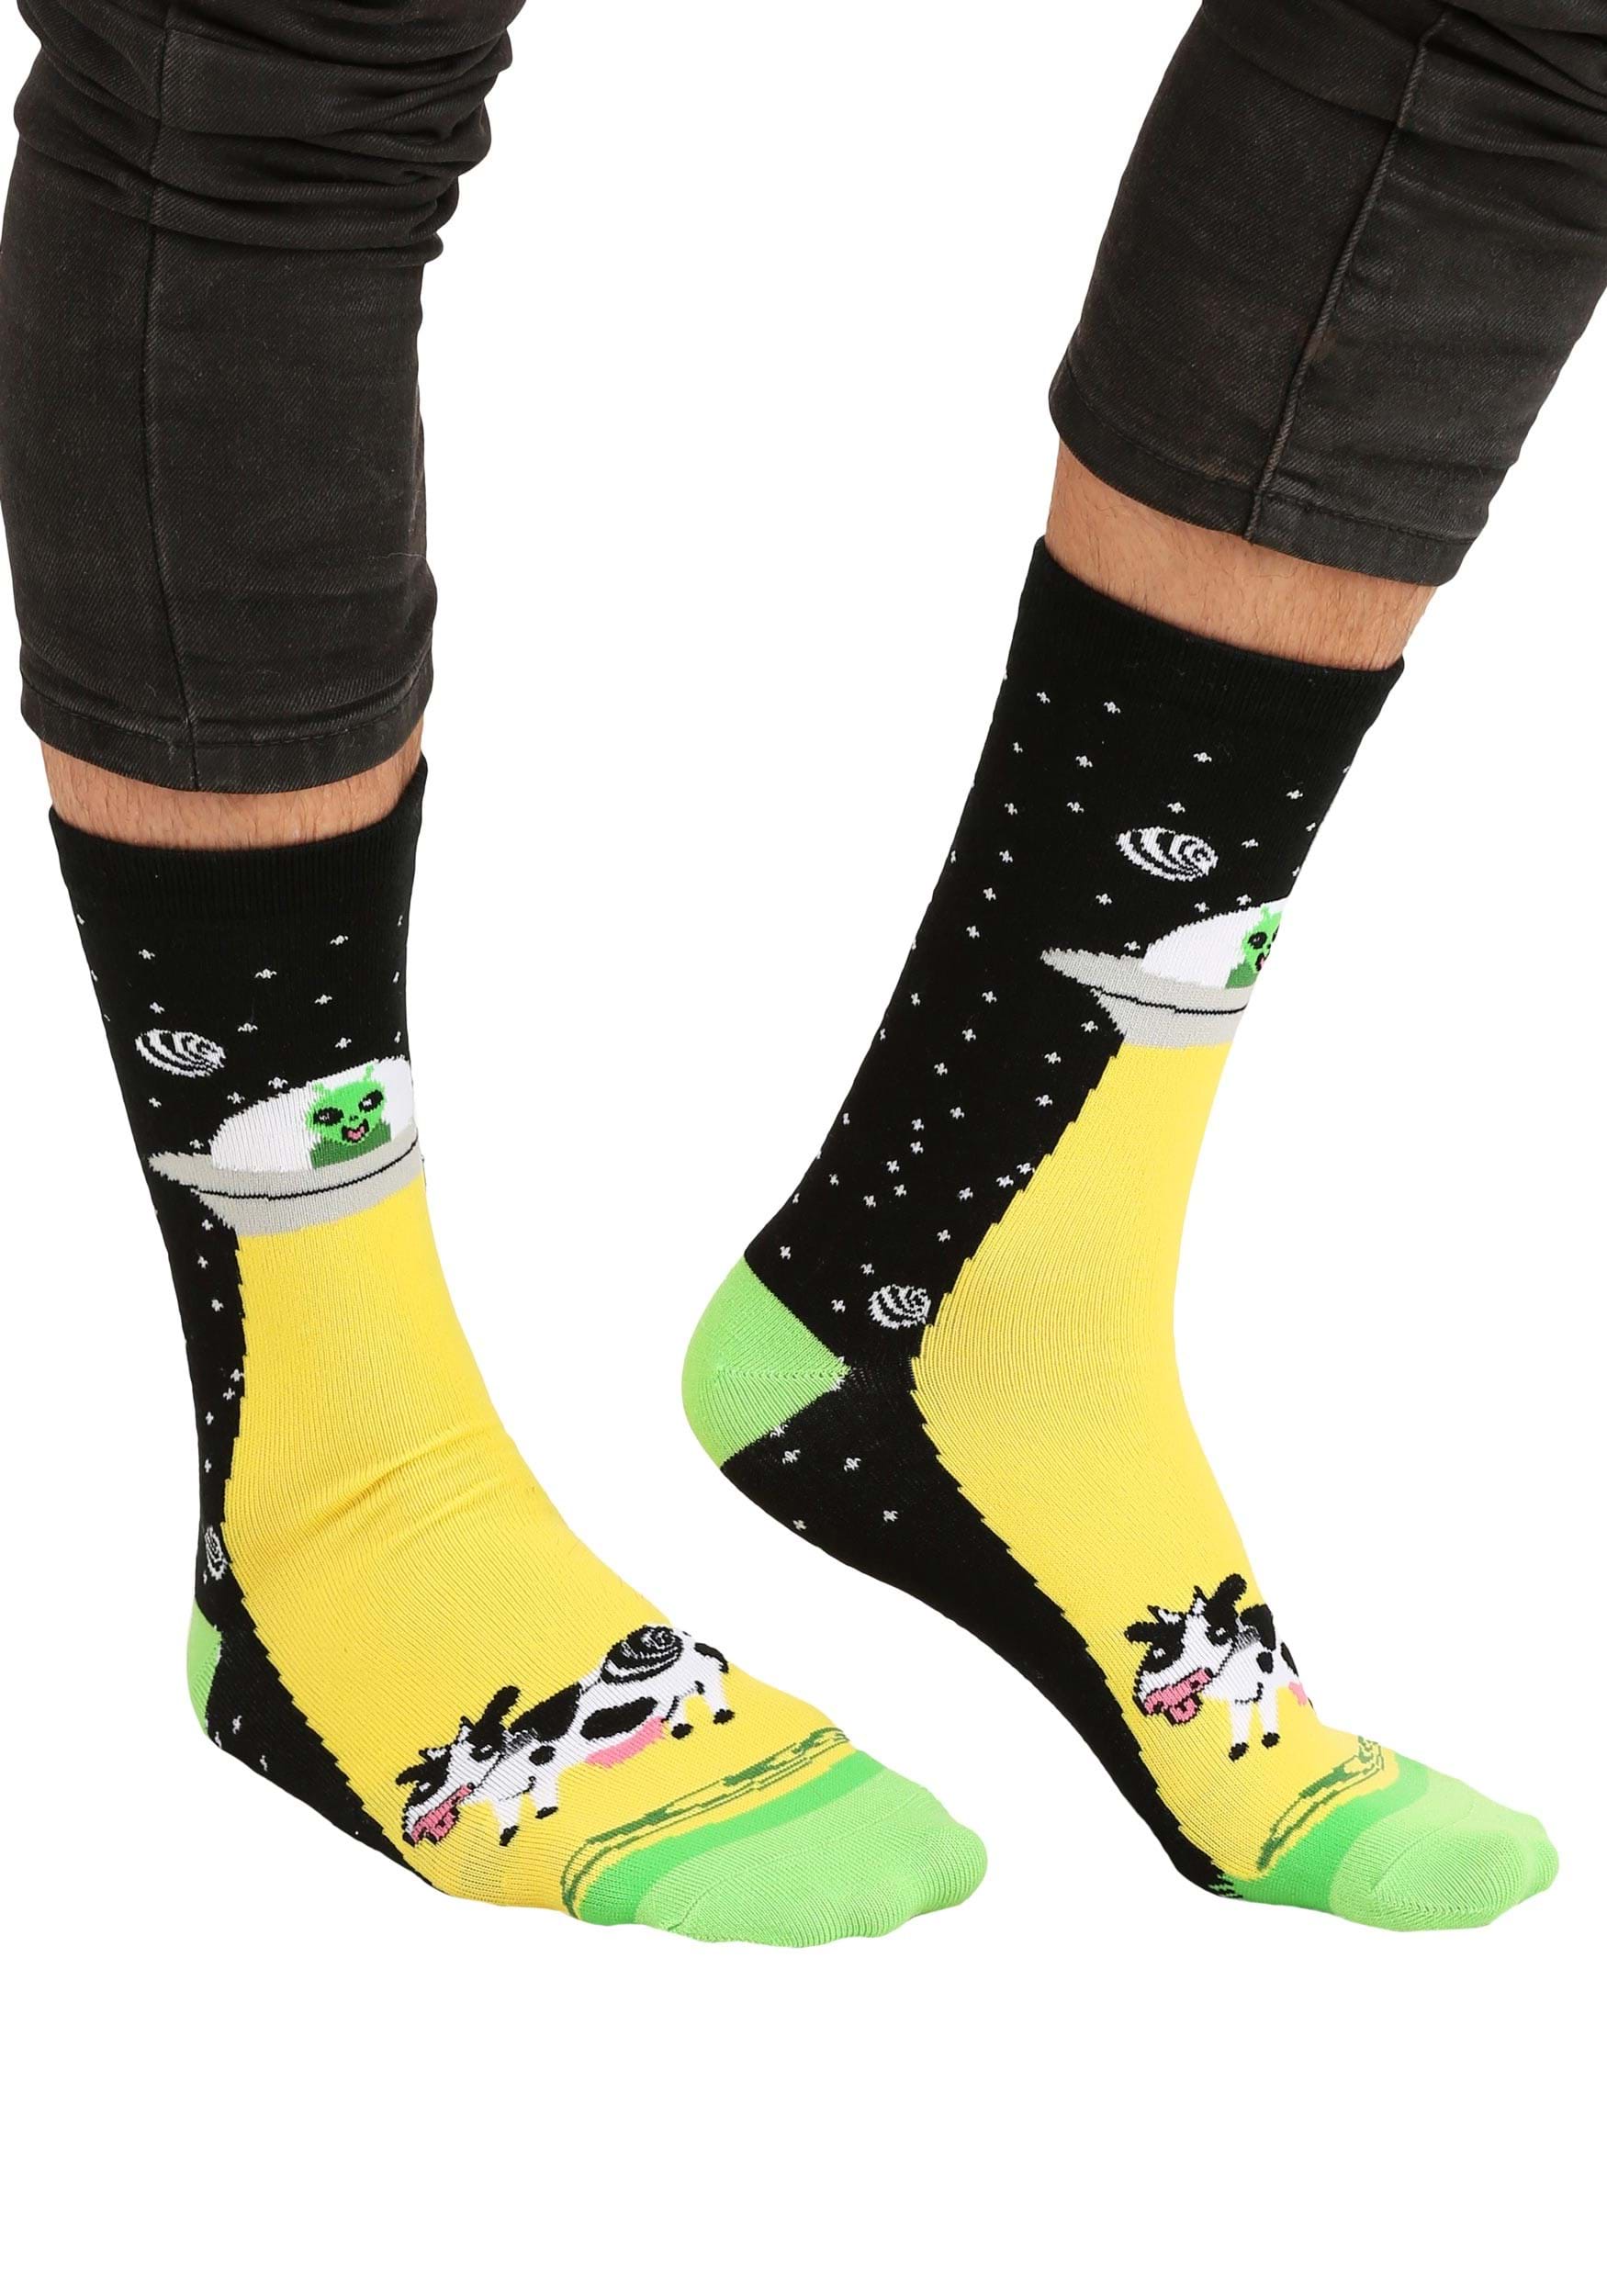 Cow Abducted By Aliens Socks , Funny Halloween Socks